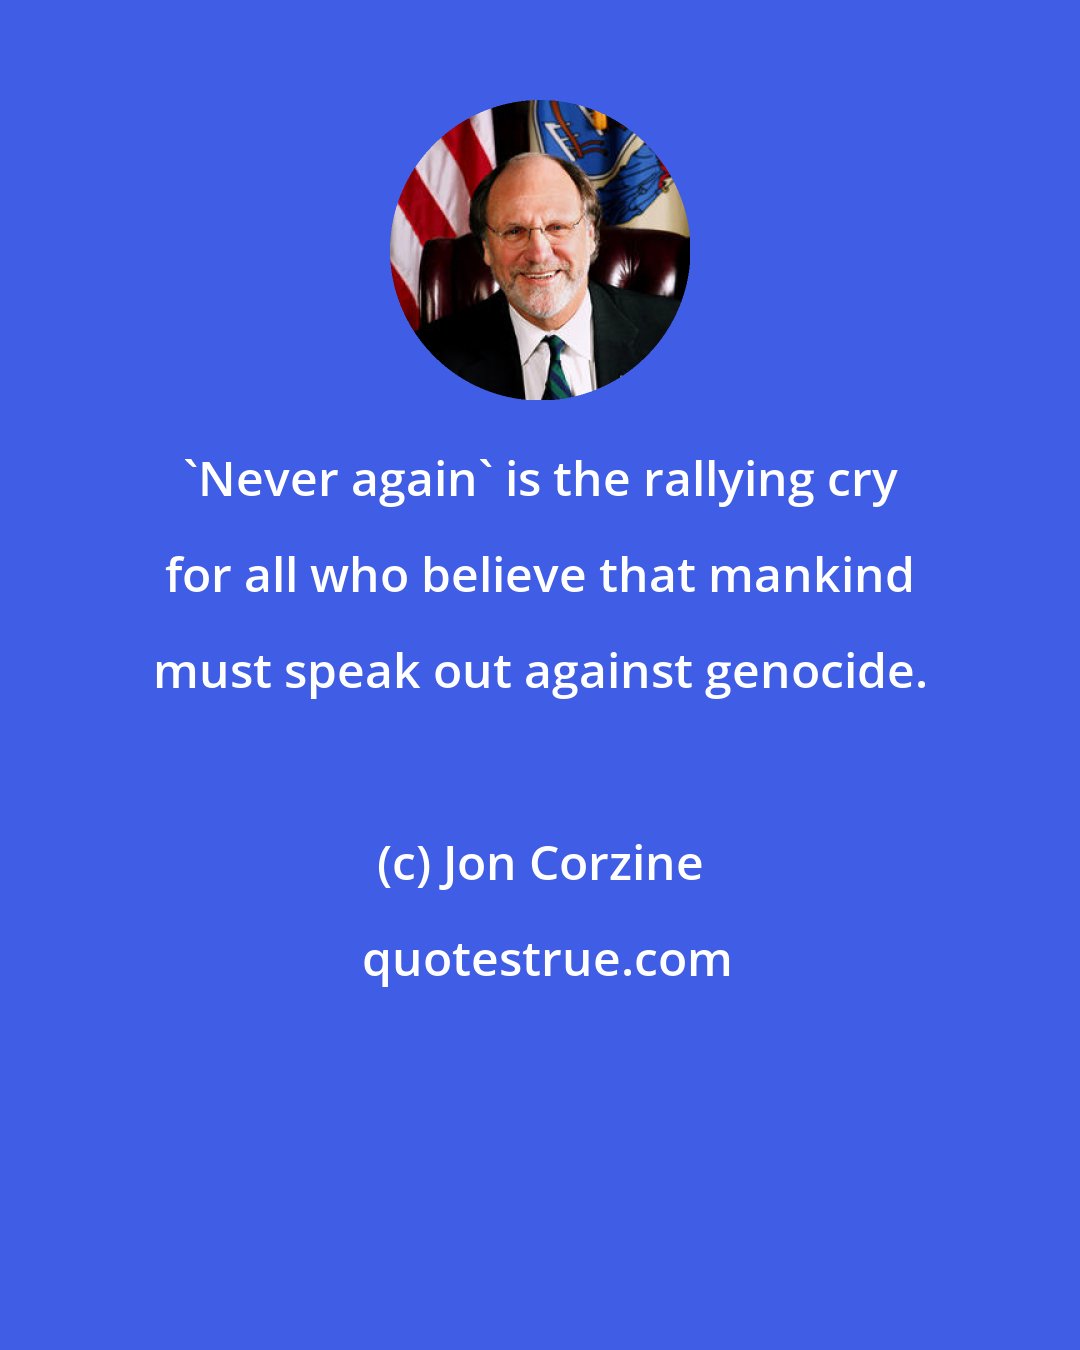 Jon Corzine: 'Never again' is the rallying cry for all who believe that mankind must speak out against genocide.